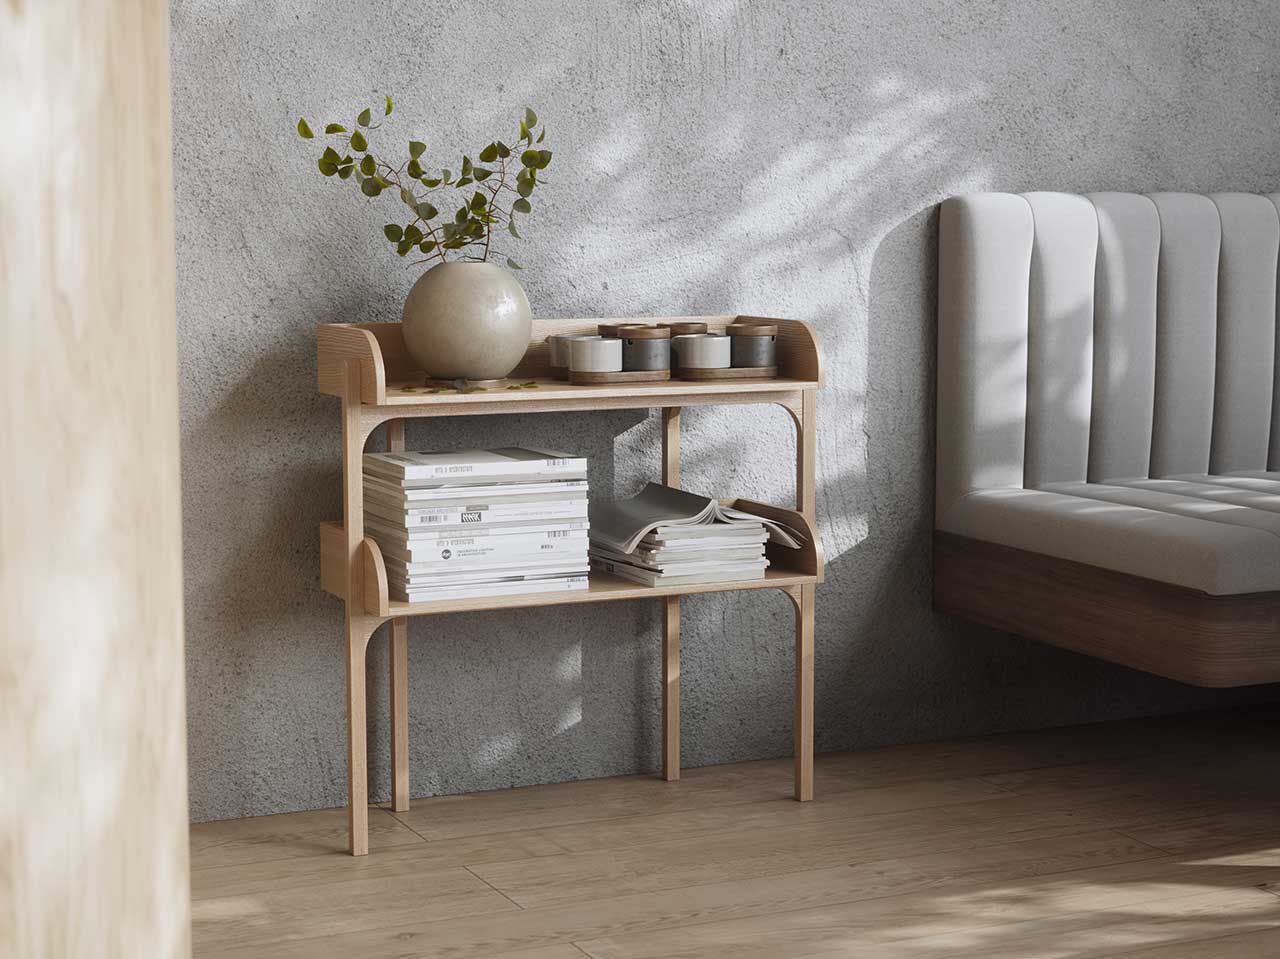 Open Shelving or Cupboard Storage? The Utility Shelf Is Both